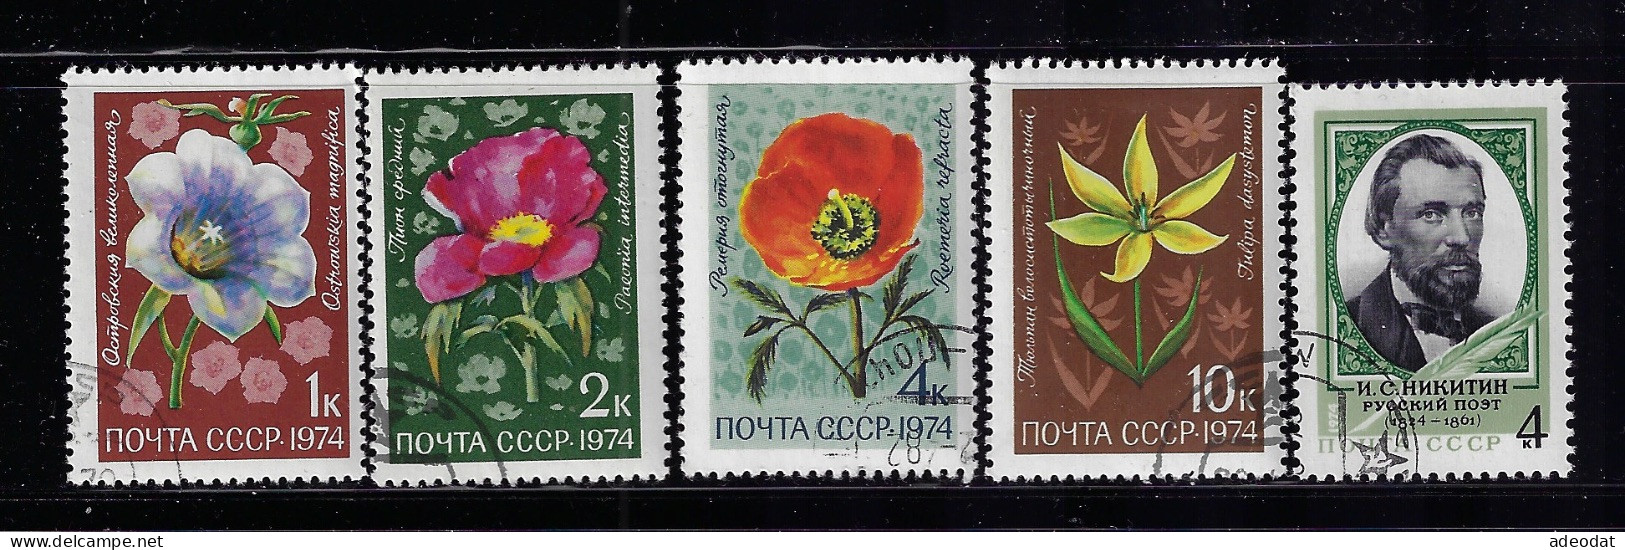 RUSSIA  1974 SCOTT #4269-4272,4274 USED - Used Stamps